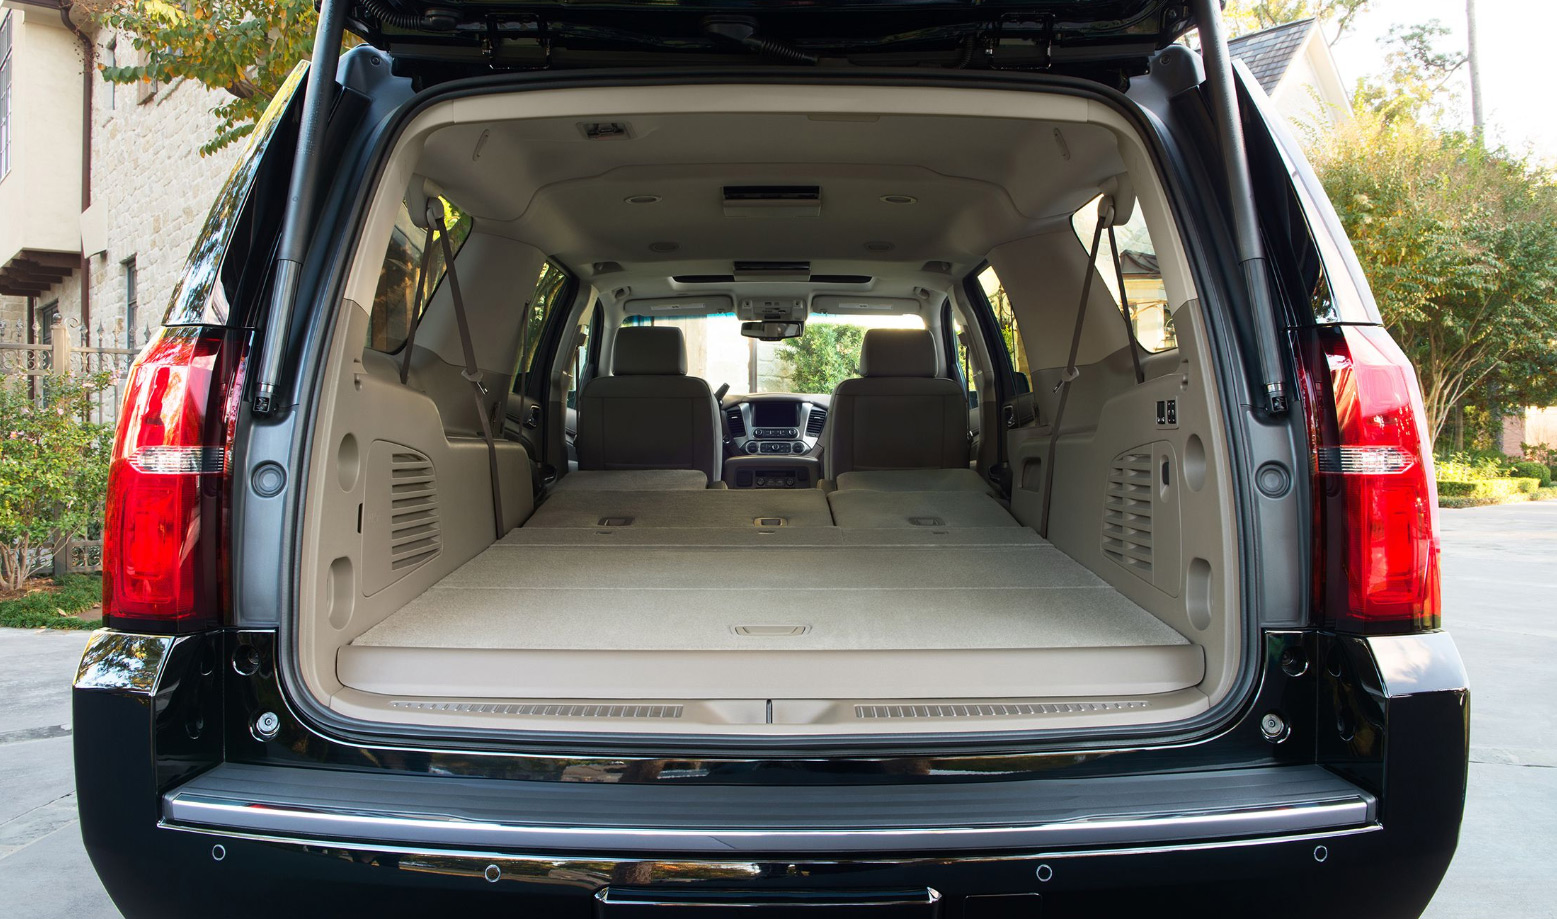 Valley Chevy - 2019 Suburban RST Pictures & Specs - Cargo Space